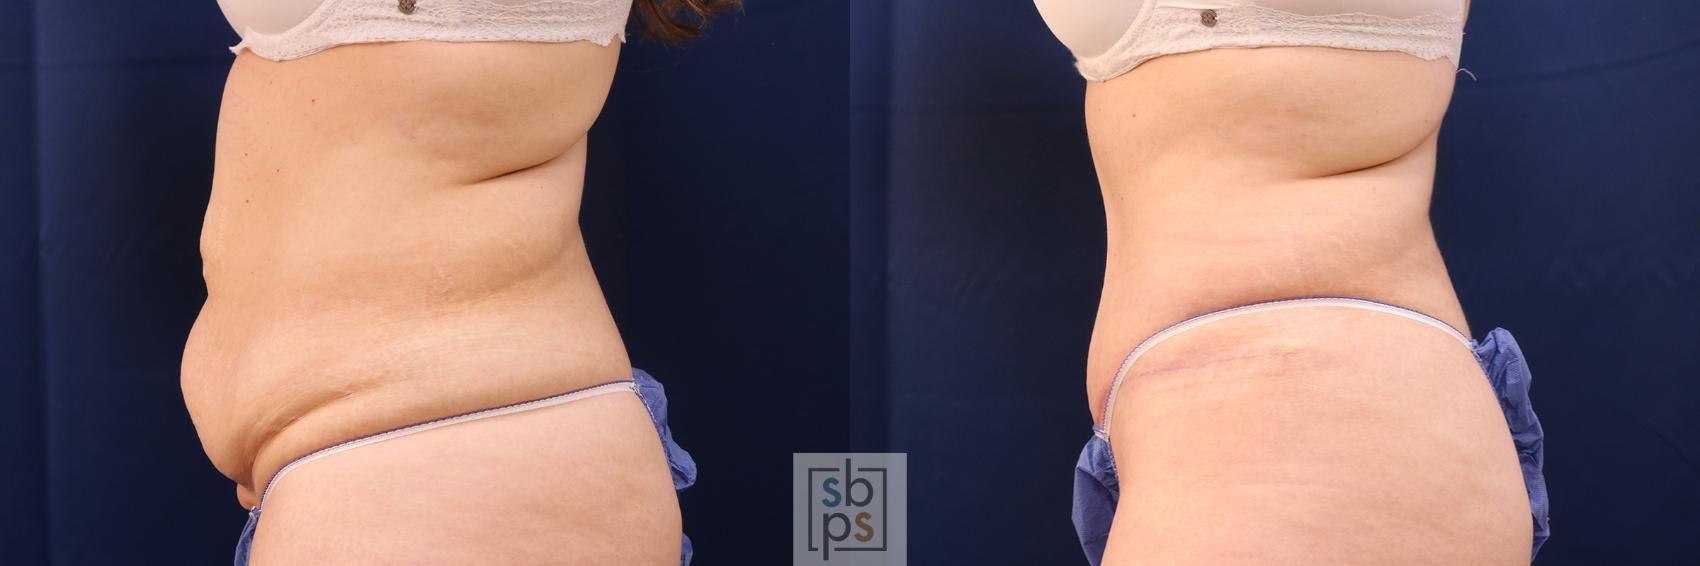 Before & After Tummy Tuck Case 575 Left Side View in Torrance, CA